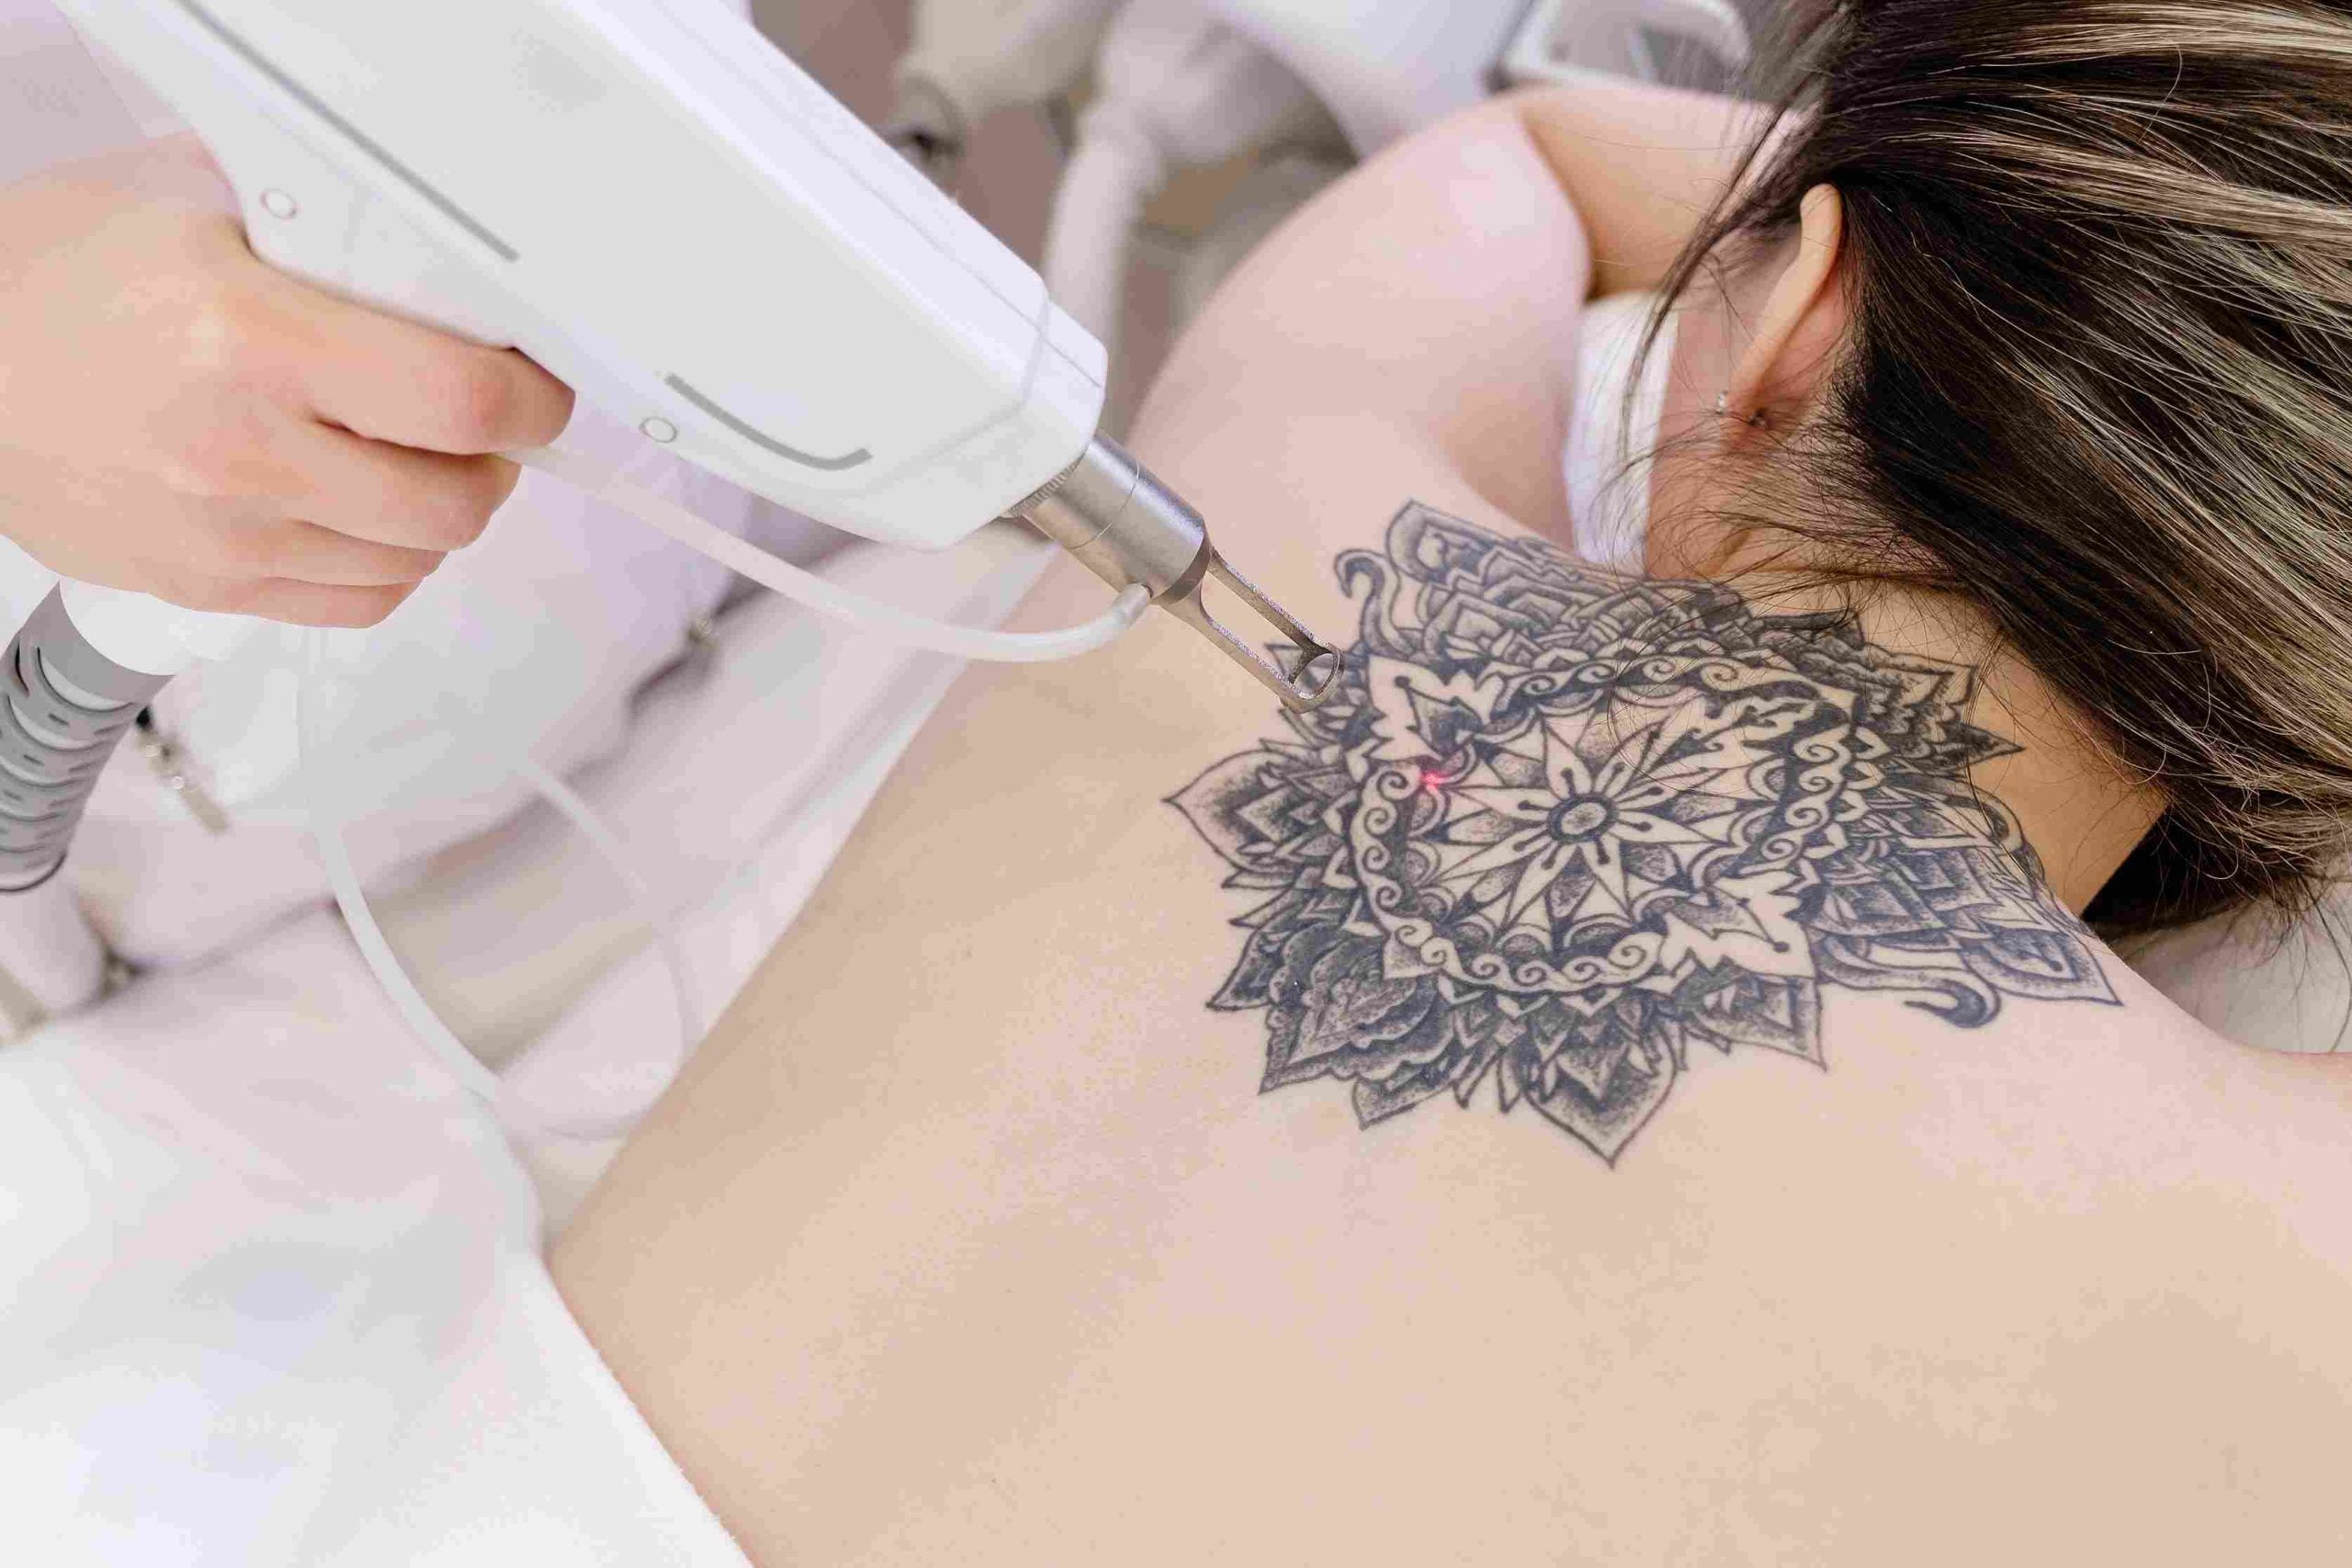 Portrait of a woman getting tattoo removal laser treatment on her back | Avail Aesthetics in Cary, Raleigh & Wake Forest, NC